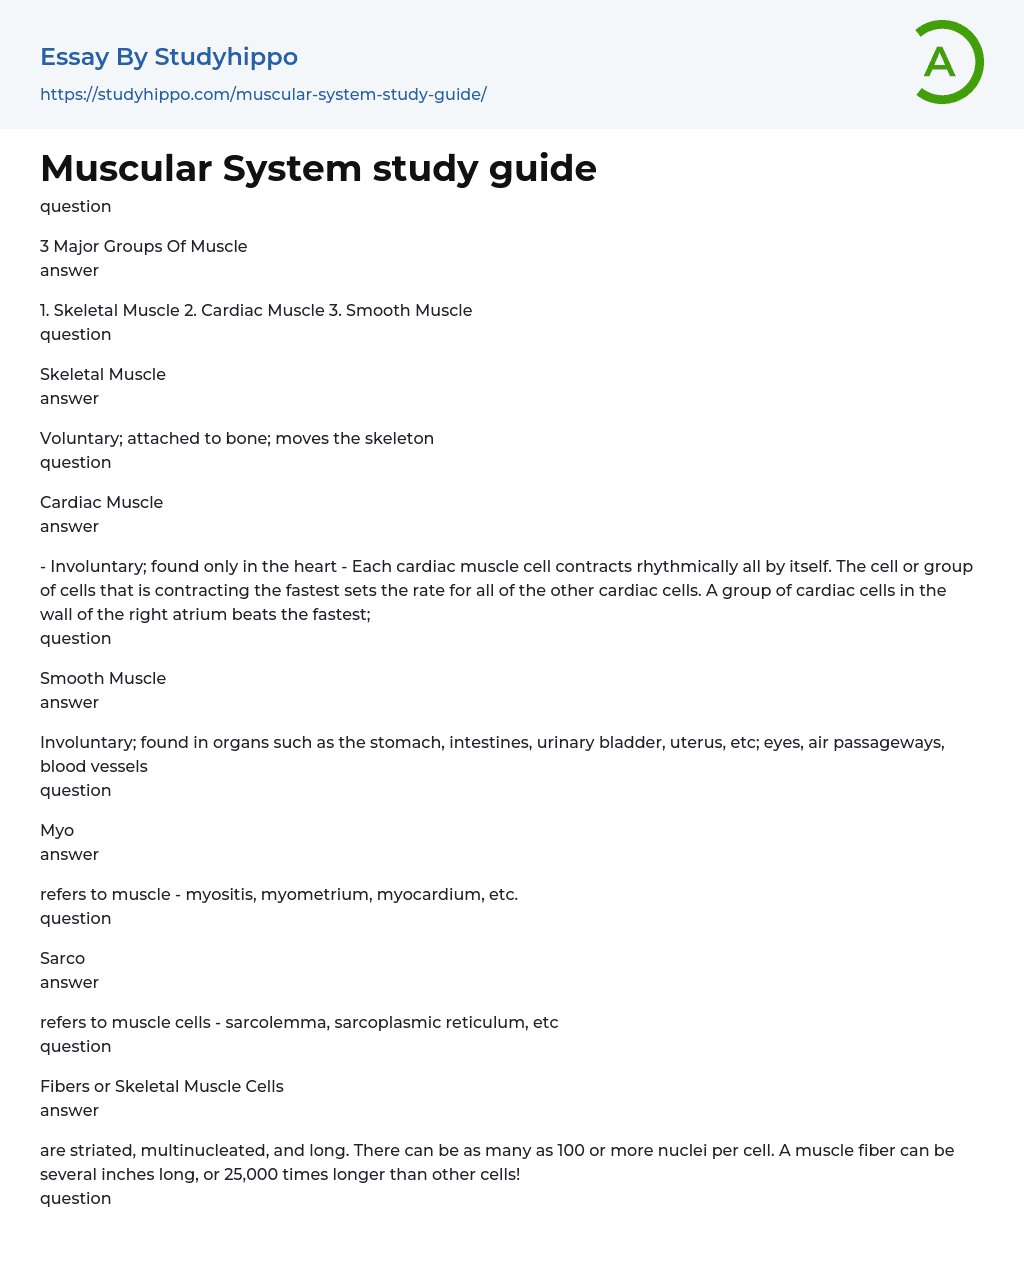 Muscular System study guide Essay Example